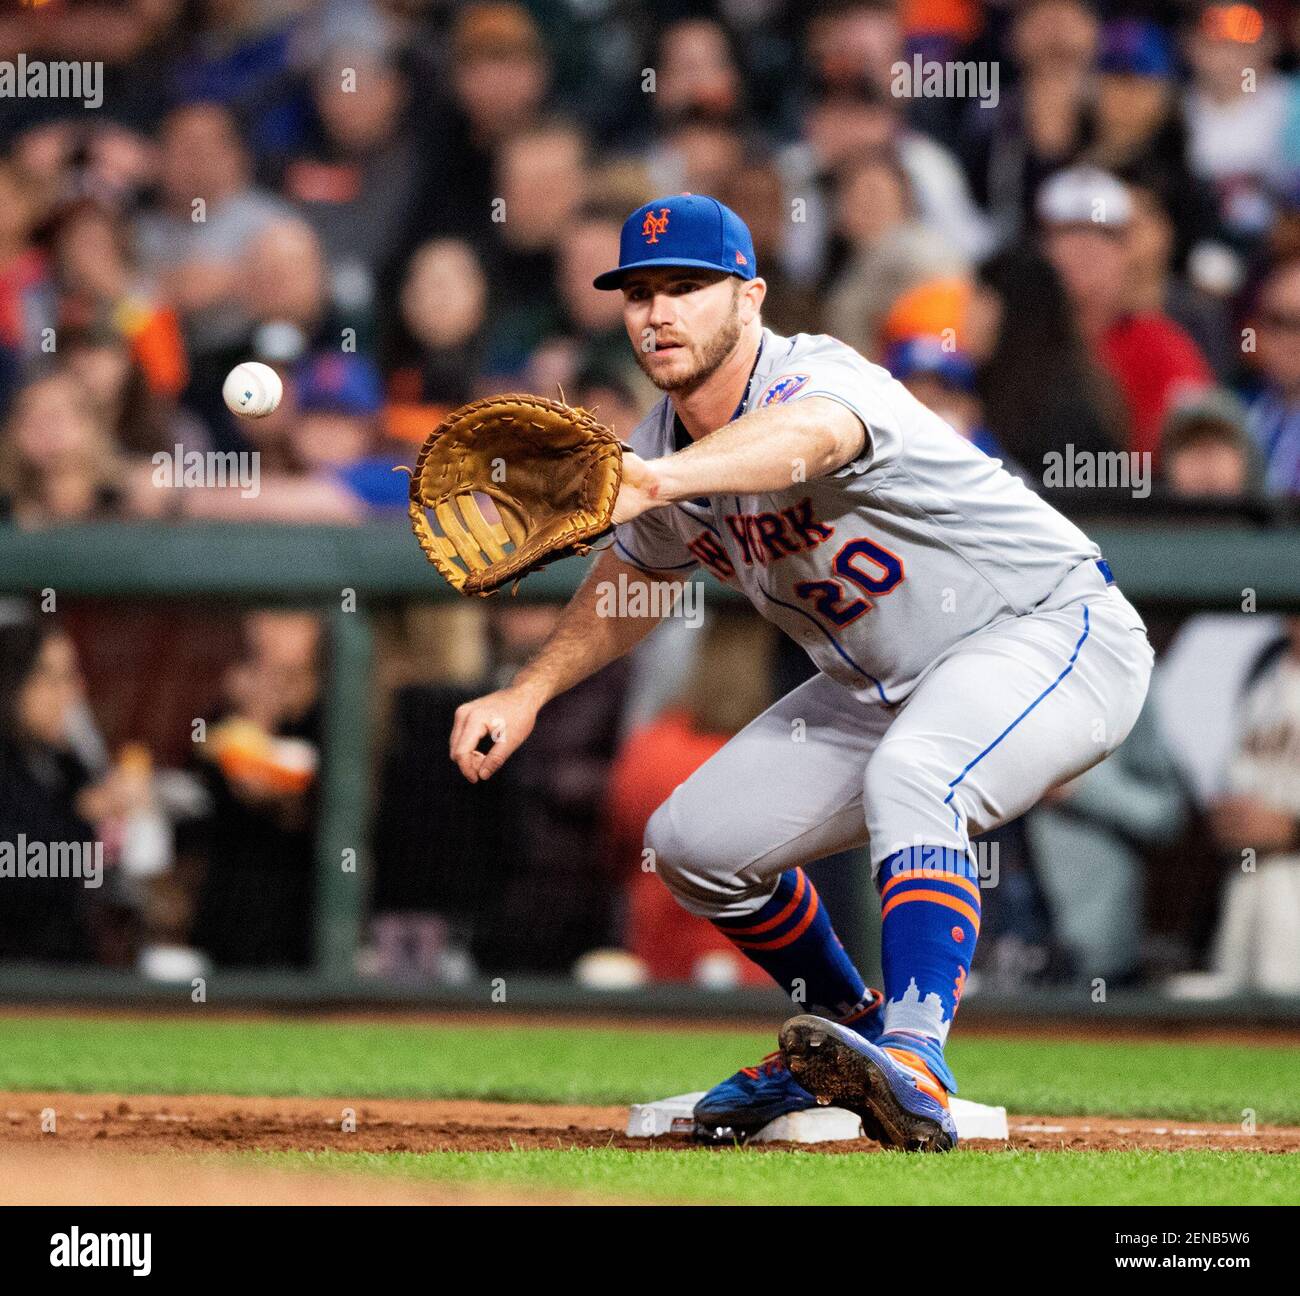 July 18, 2019: New York Mets first baseman Pete Alonso (20) makes a play at  first base, during a MLB baseball game between the New York Mets and the  San Francisco Giants